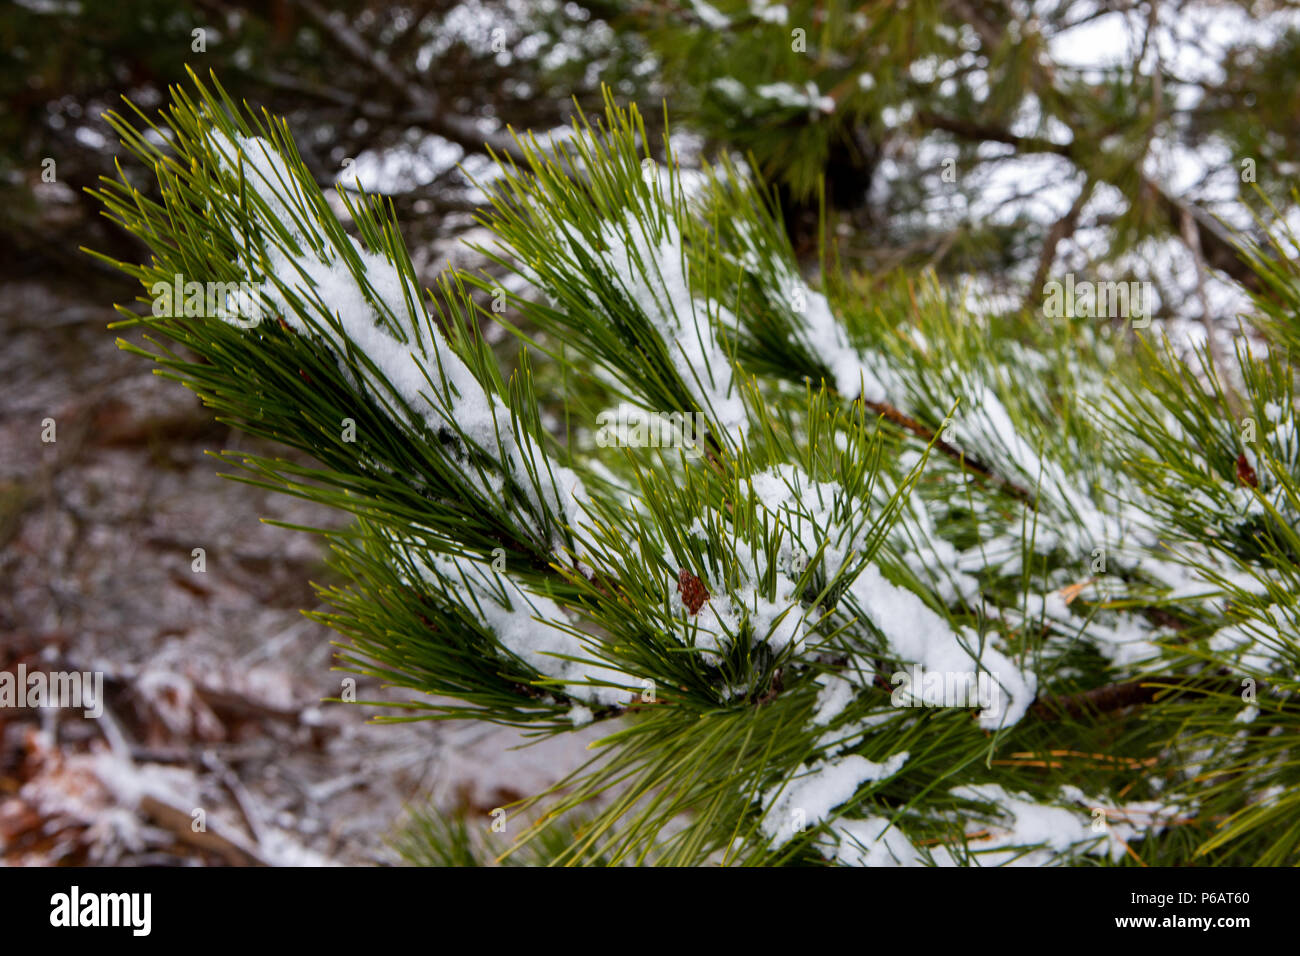 Snow collected on the pine needles of a tree in Oberon New South Wales Australia on 17th June 2018 Stock Photo